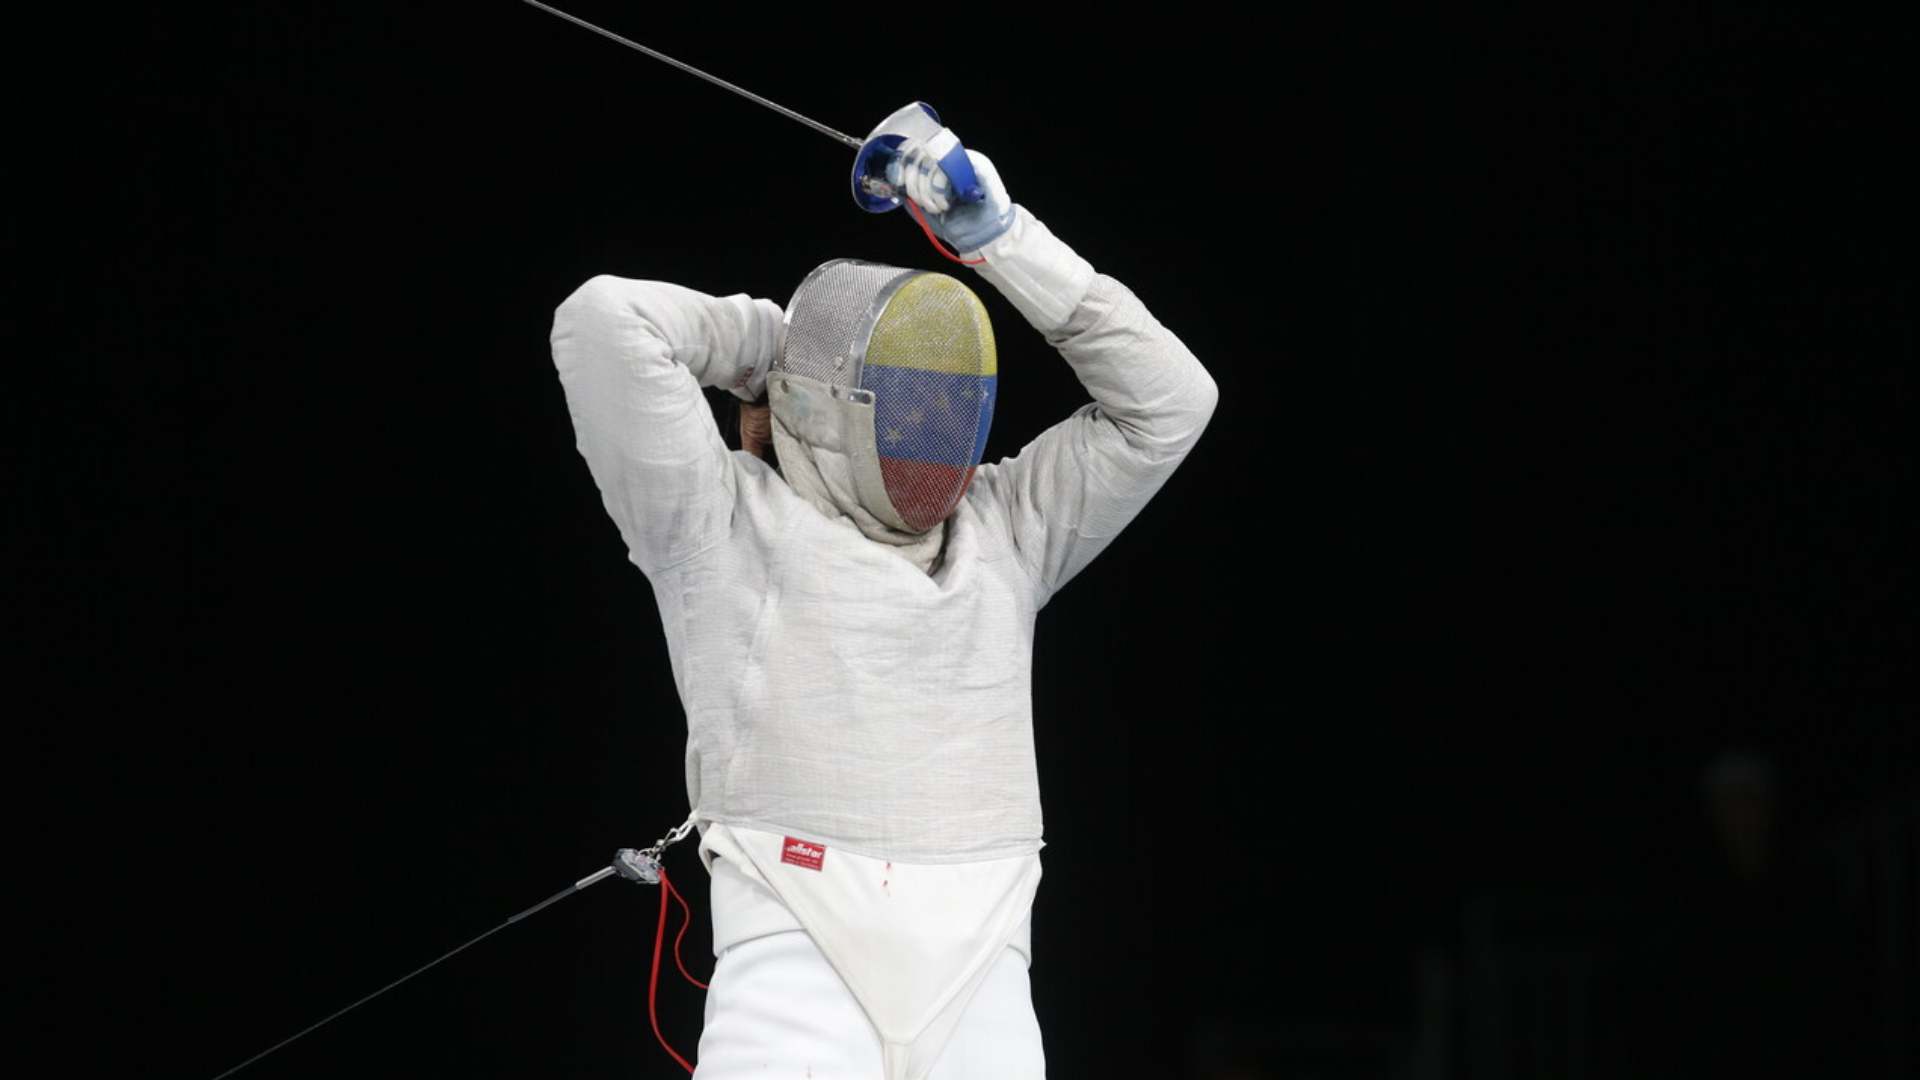 Fencing: Chile Unable to Beat Venezuela in Male's Team Epee